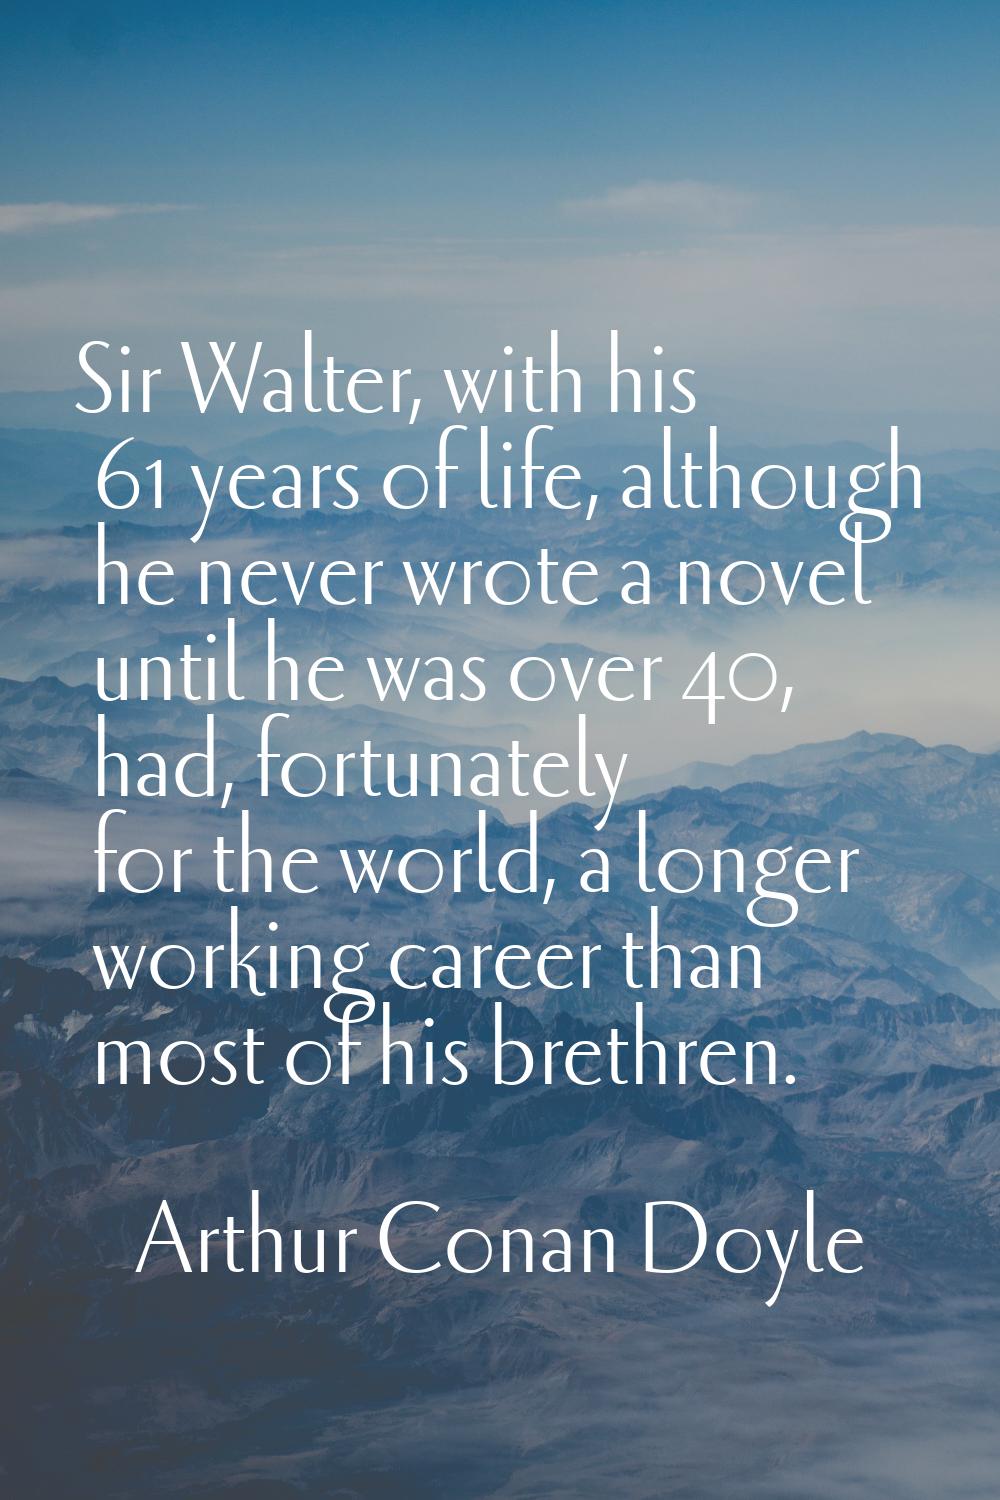 Sir Walter, with his 61 years of life, although he never wrote a novel until he was over 40, had, f